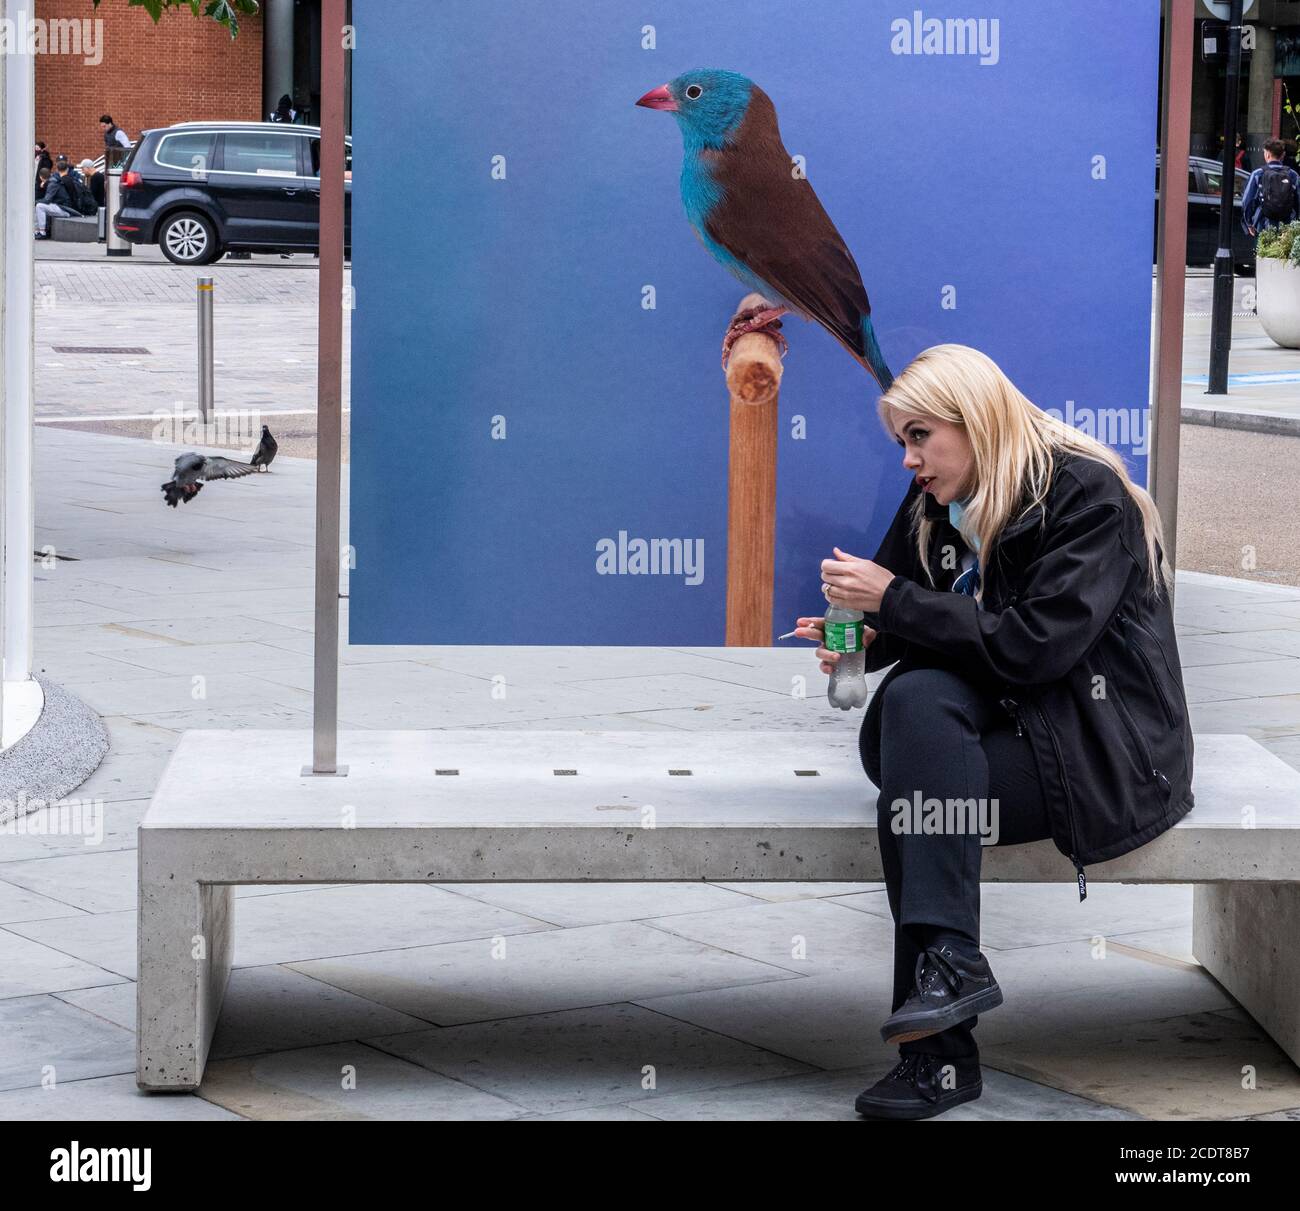 Young woman sitting on bench using phone with picture of bird, Kings Cross, London, England Stock Photo